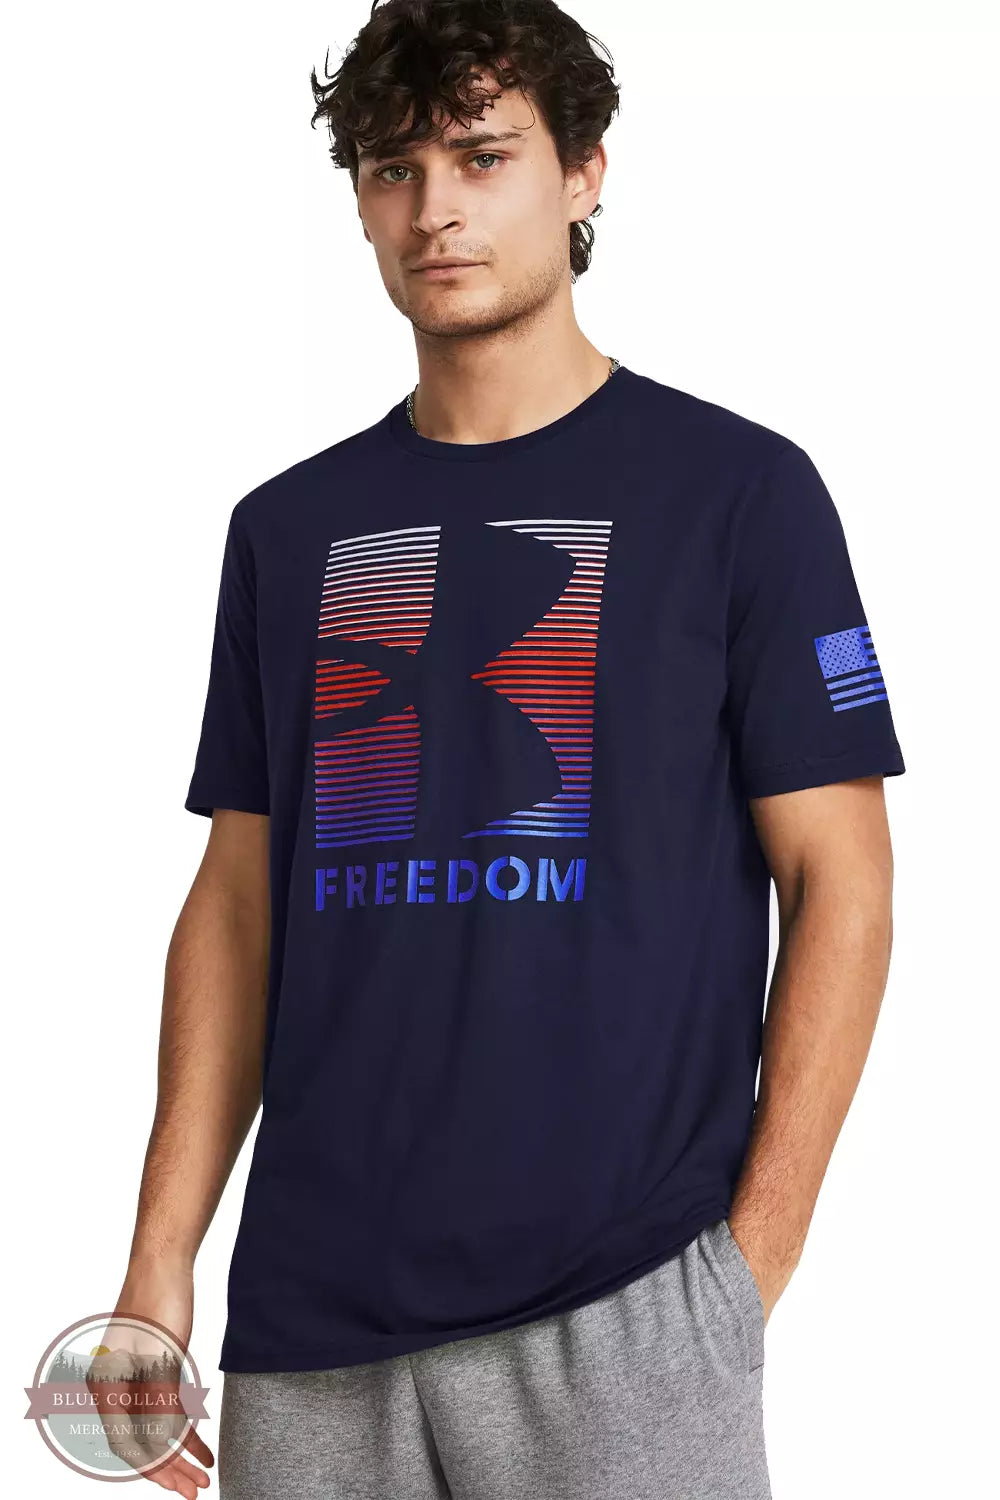 Under Armour 1382995 Freedom USA T-Shirt Front View